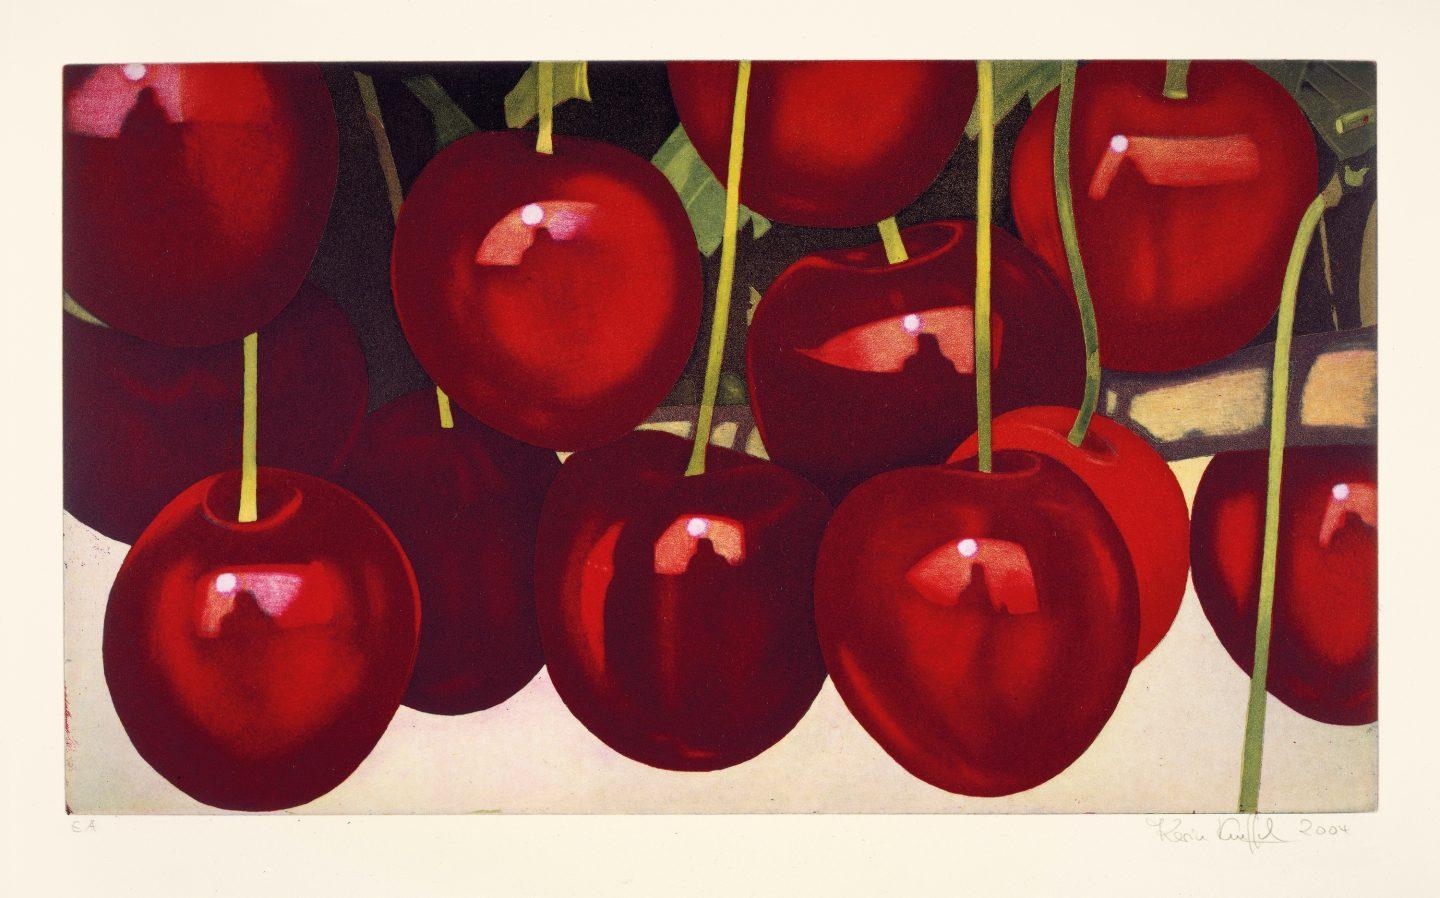 Karin Kneffel Print - untitled, cherries, 2004 etching on hand-made paper, photorealistic